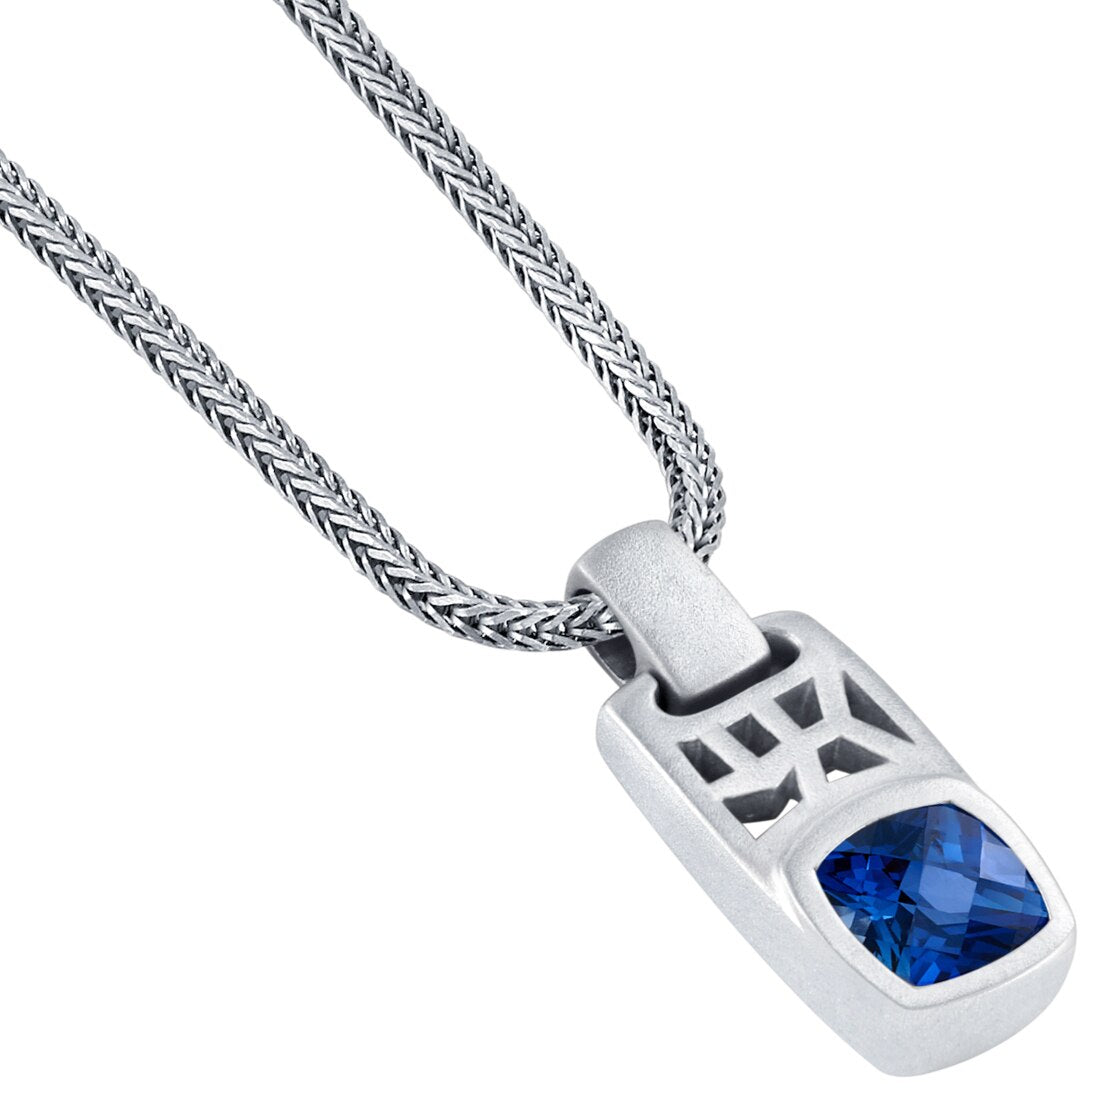 PEORA Created Blue Sapphire Amulet Tag Pendant Necklace for Men Sterling  Silver, 4.50 Carats Cushion Cut, Brushed Finished, with 22-Inch Italian  Chain | Amazon.com